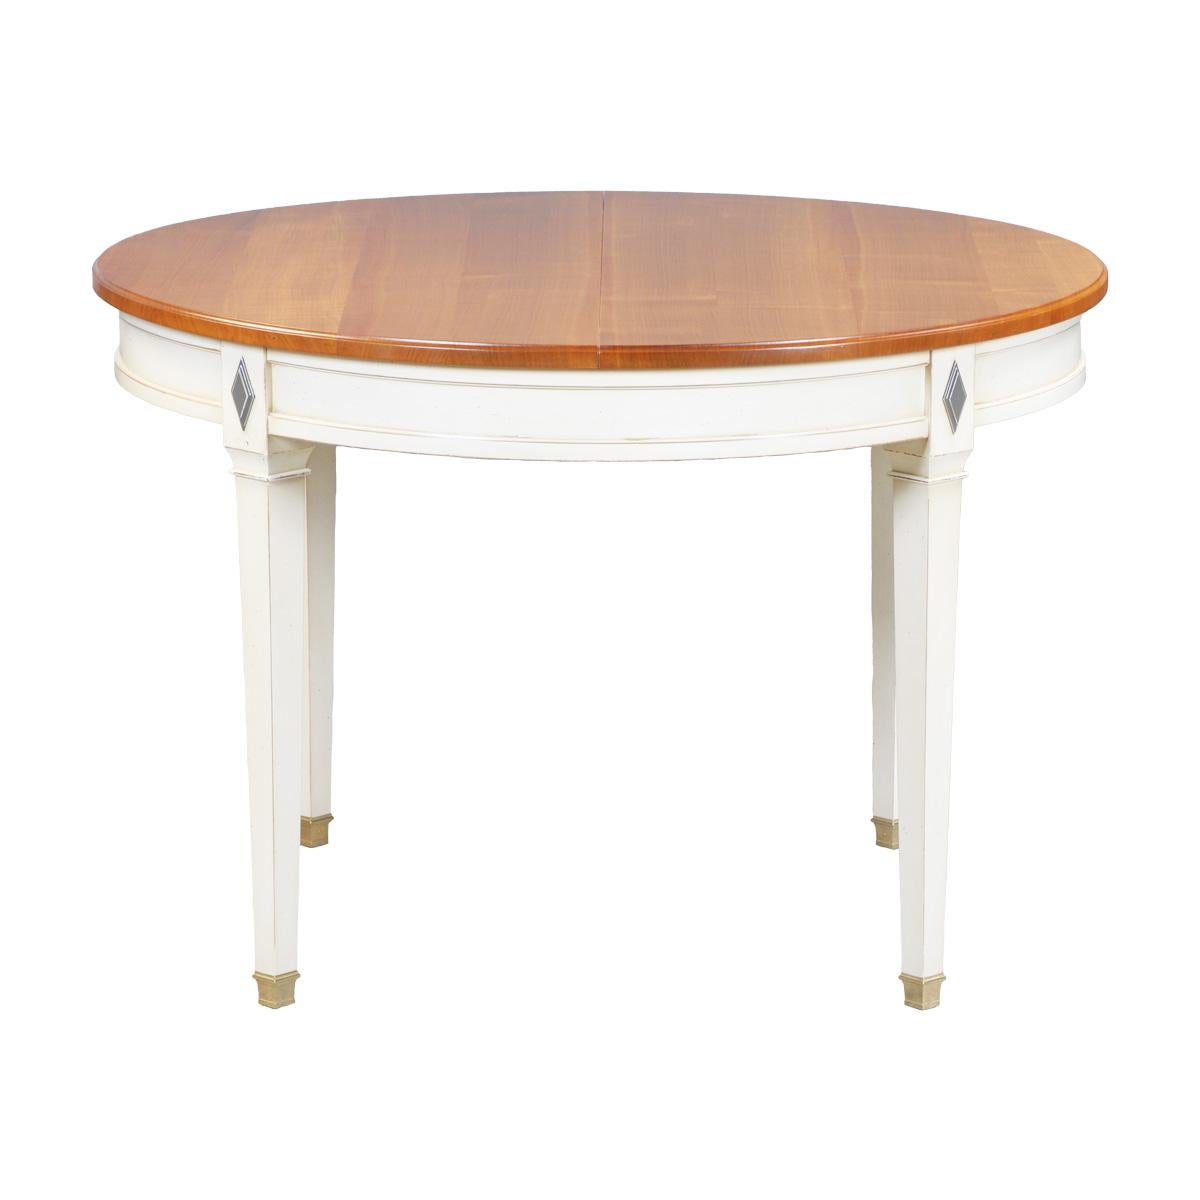 Contemporary French Directoire style round Table in solid cherry wood, white-cream lacquered For Sale